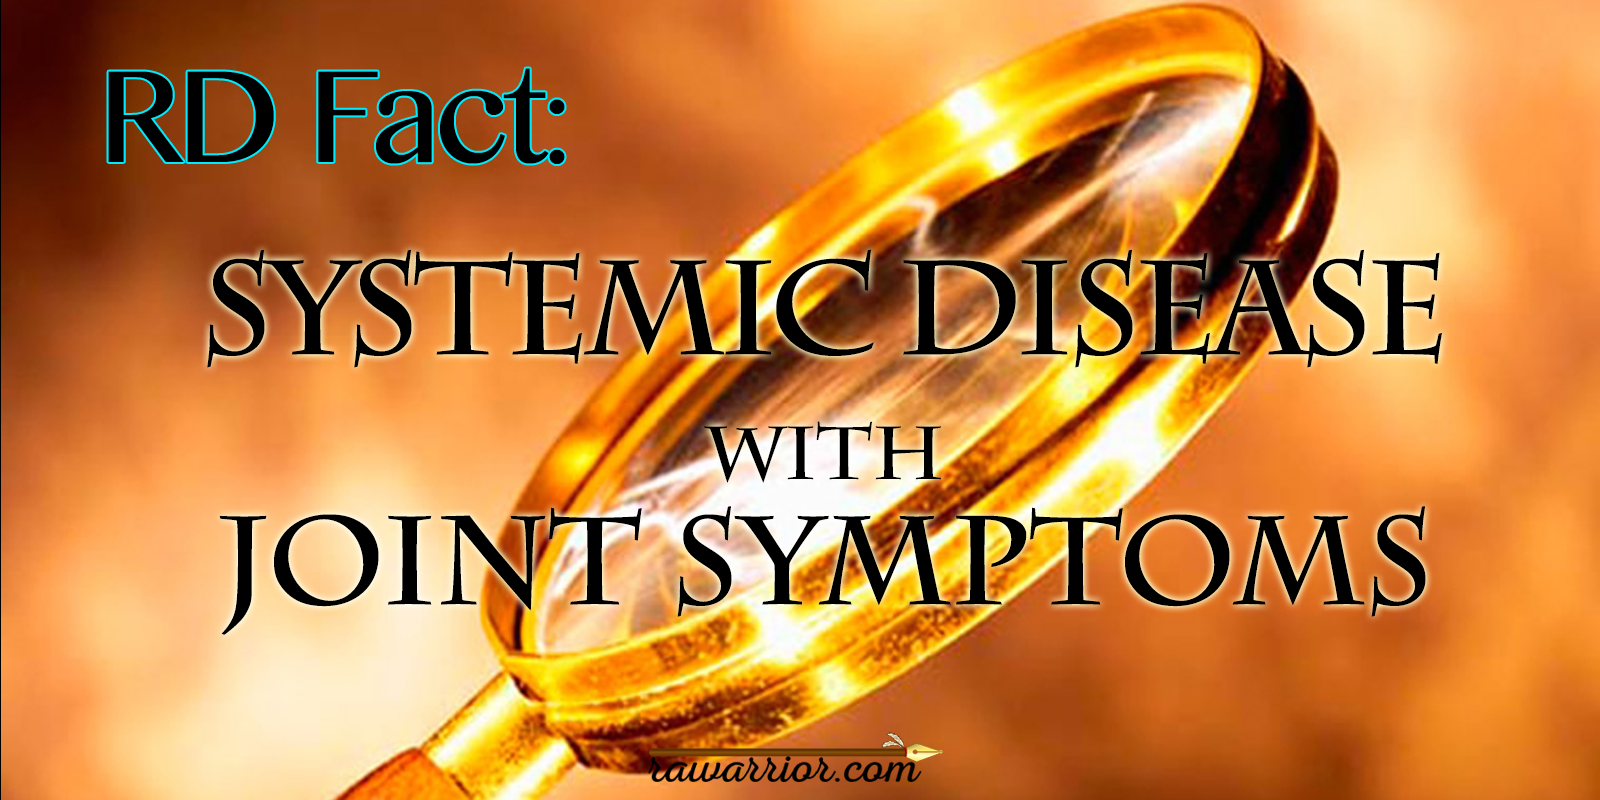 Systemic Disease with Joint Symptoms